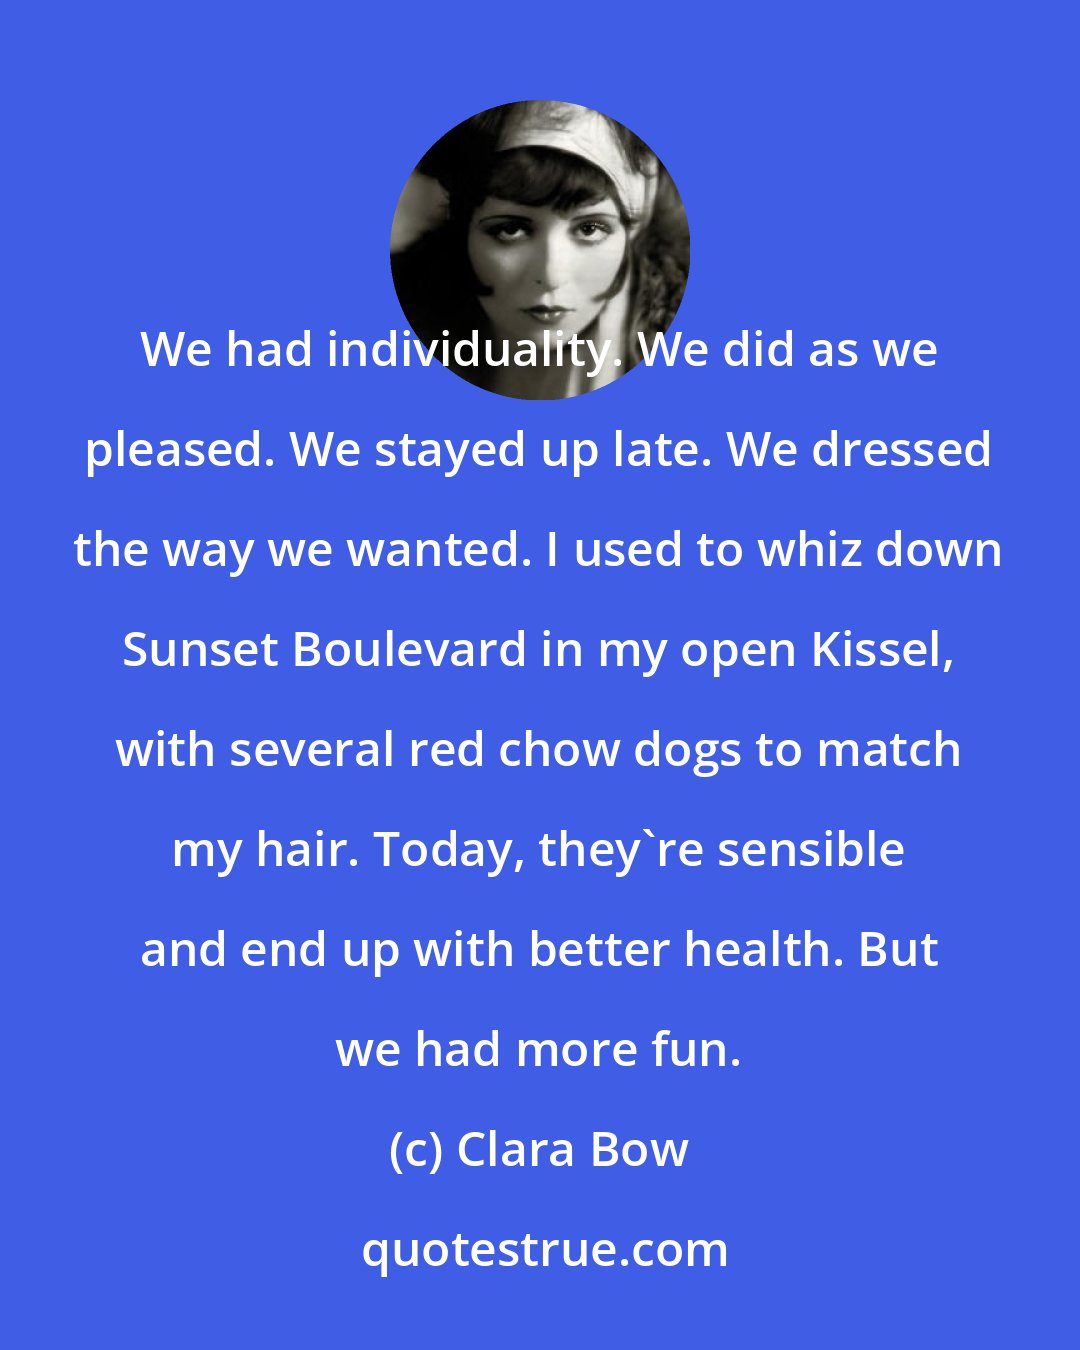 Clara Bow: We had individuality. We did as we pleased. We stayed up late. We dressed the way we wanted. I used to whiz down Sunset Boulevard in my open Kissel, with several red chow dogs to match my hair. Today, they're sensible and end up with better health. But we had more fun.